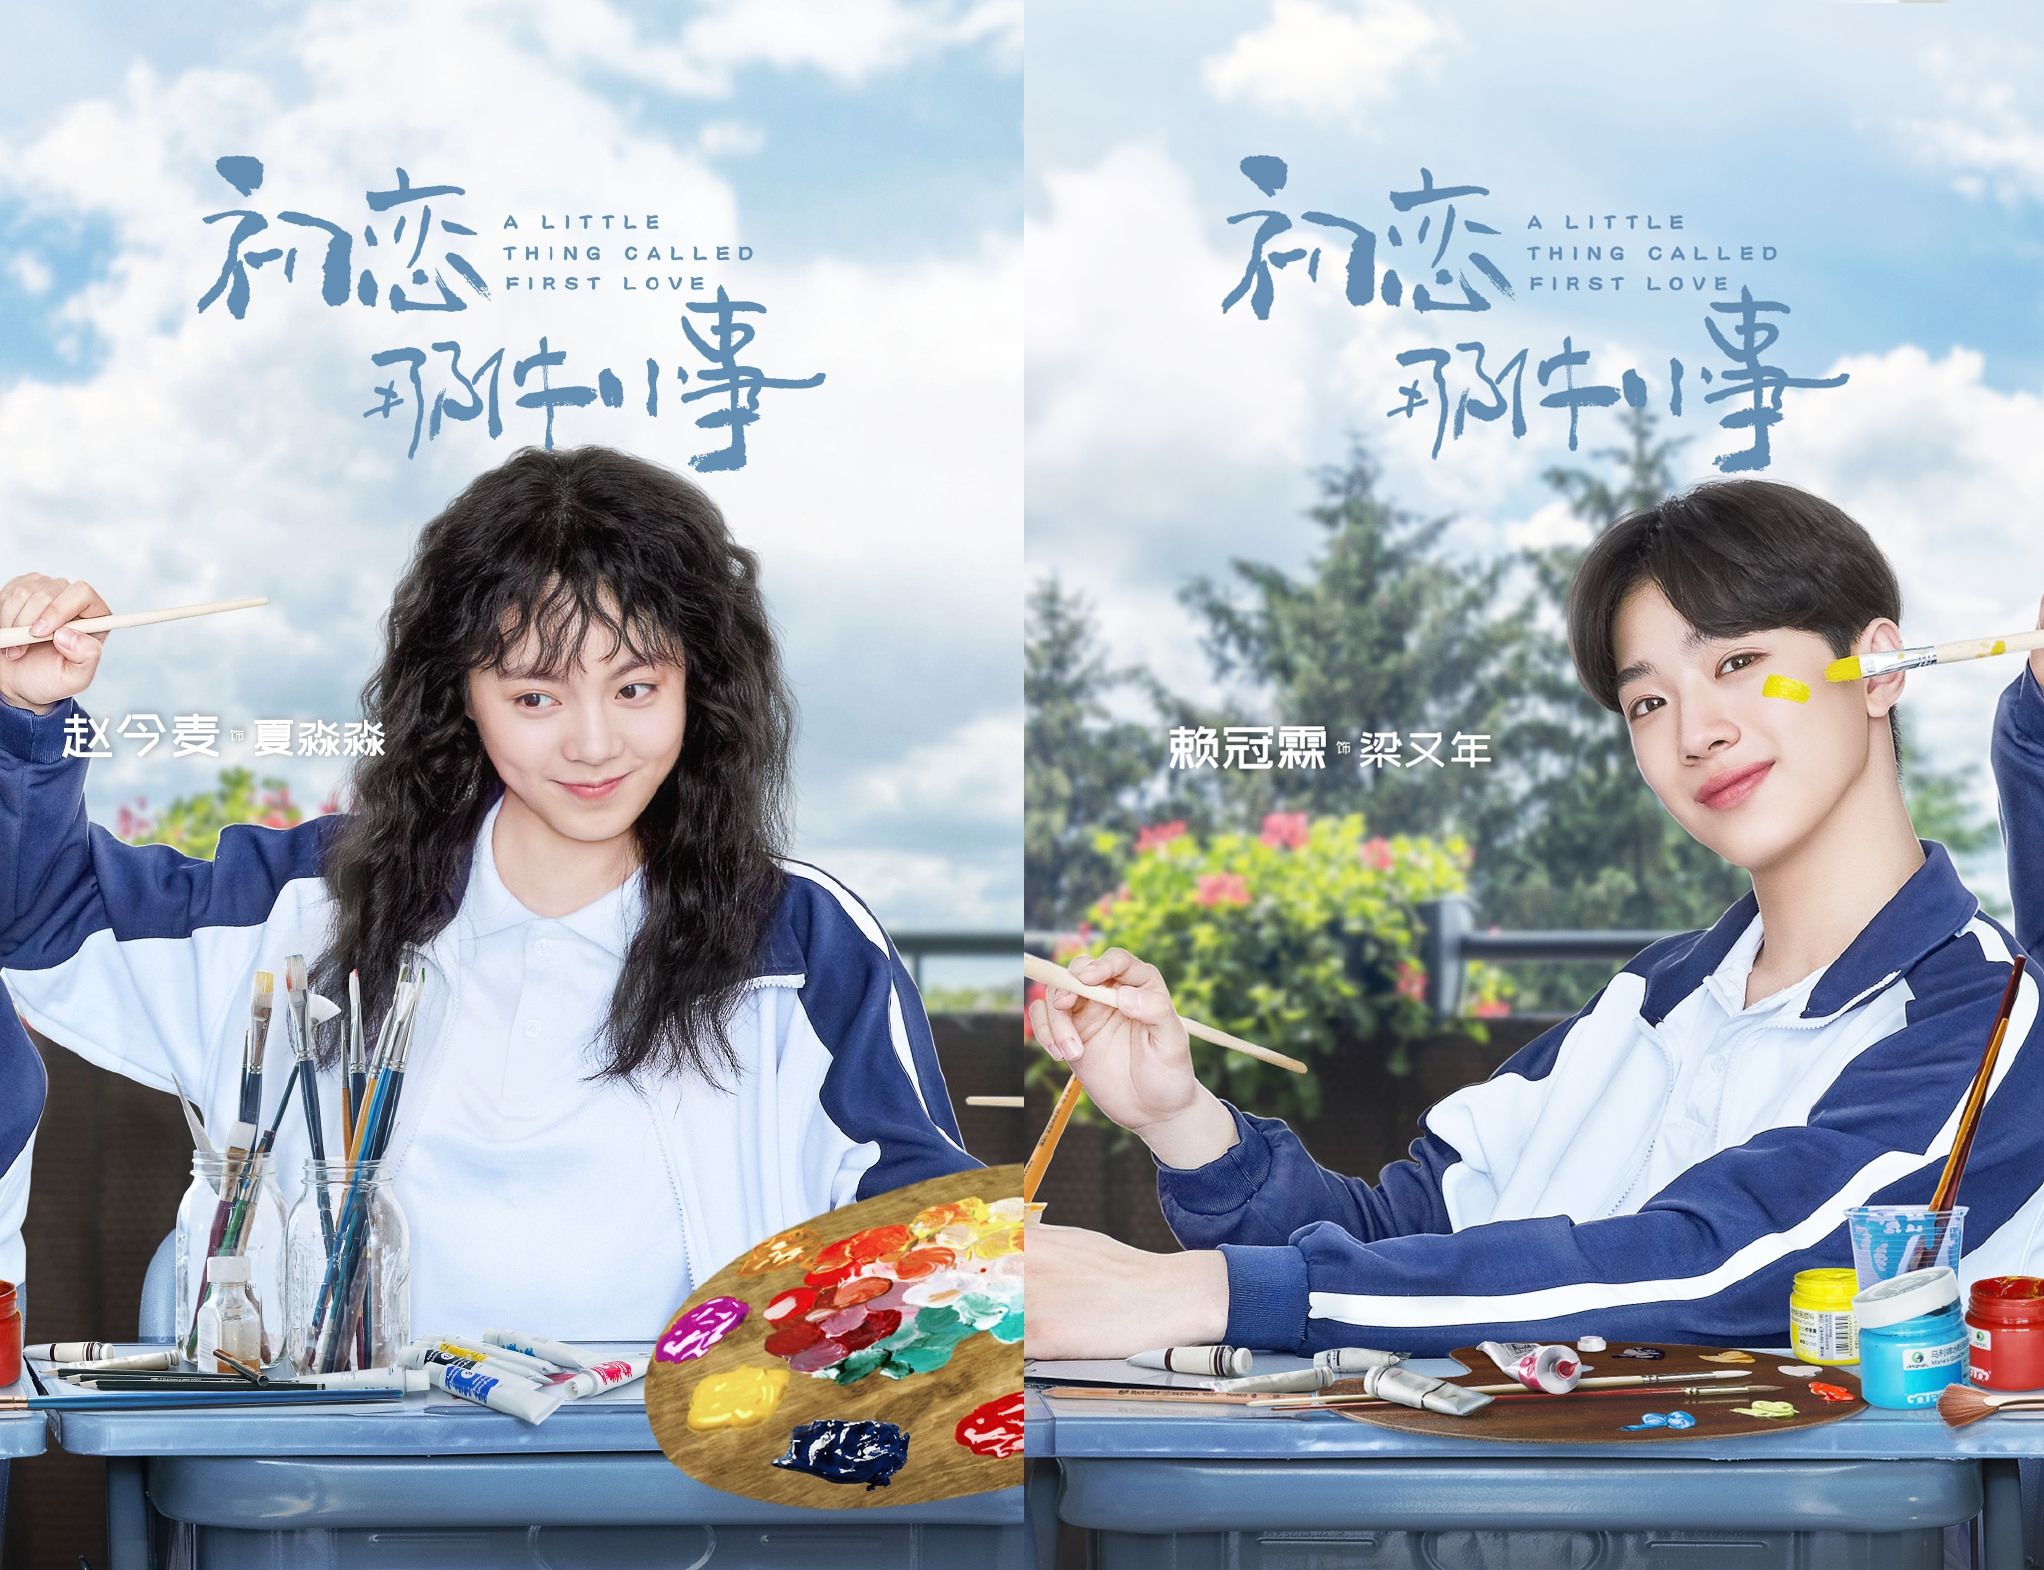 This Upcoming Chinese Drama A Little Thing Called First Love is